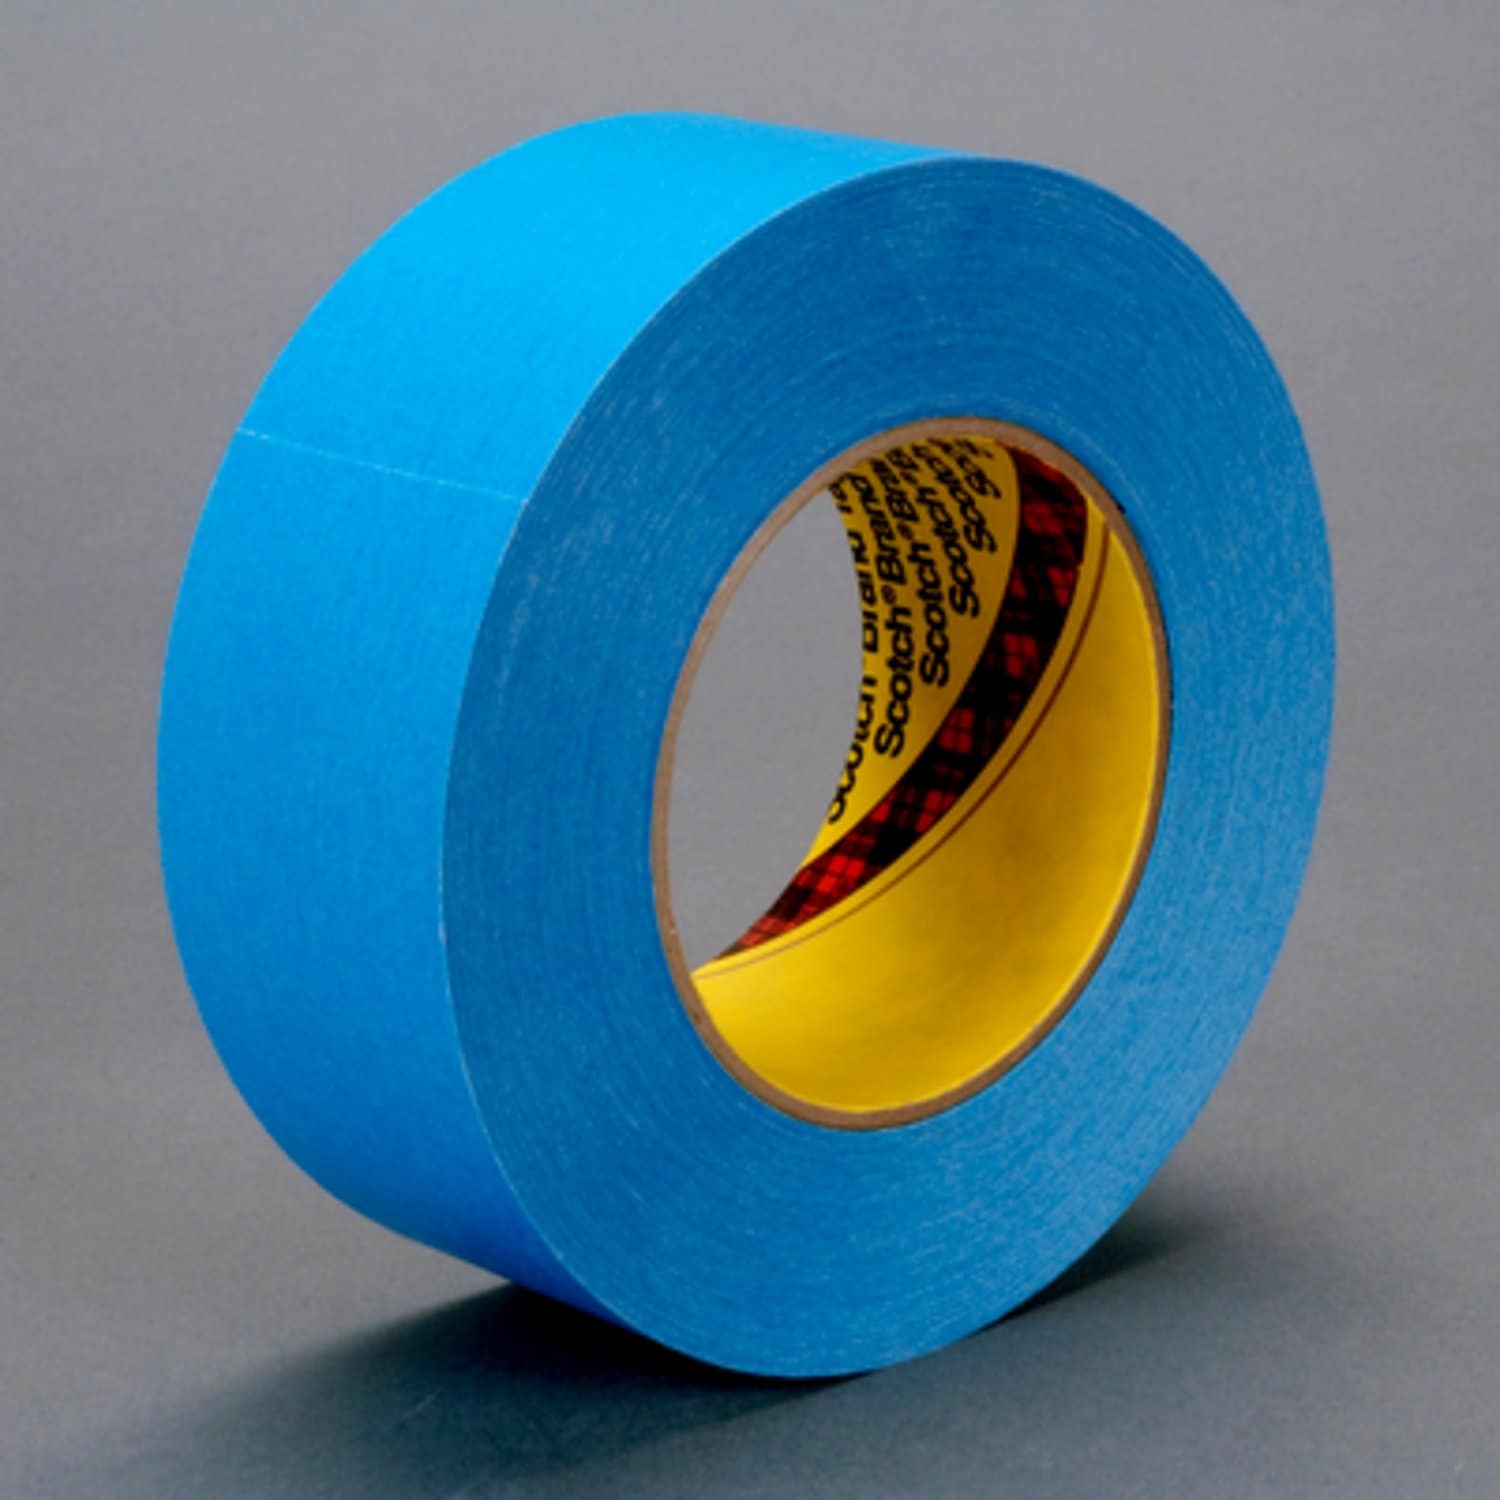 7100028021 - 3M Repulpable Strong Single Coated Tape R3187, Blue, 36 mm x 55 m, 7.5
mil, 24 rolls per case